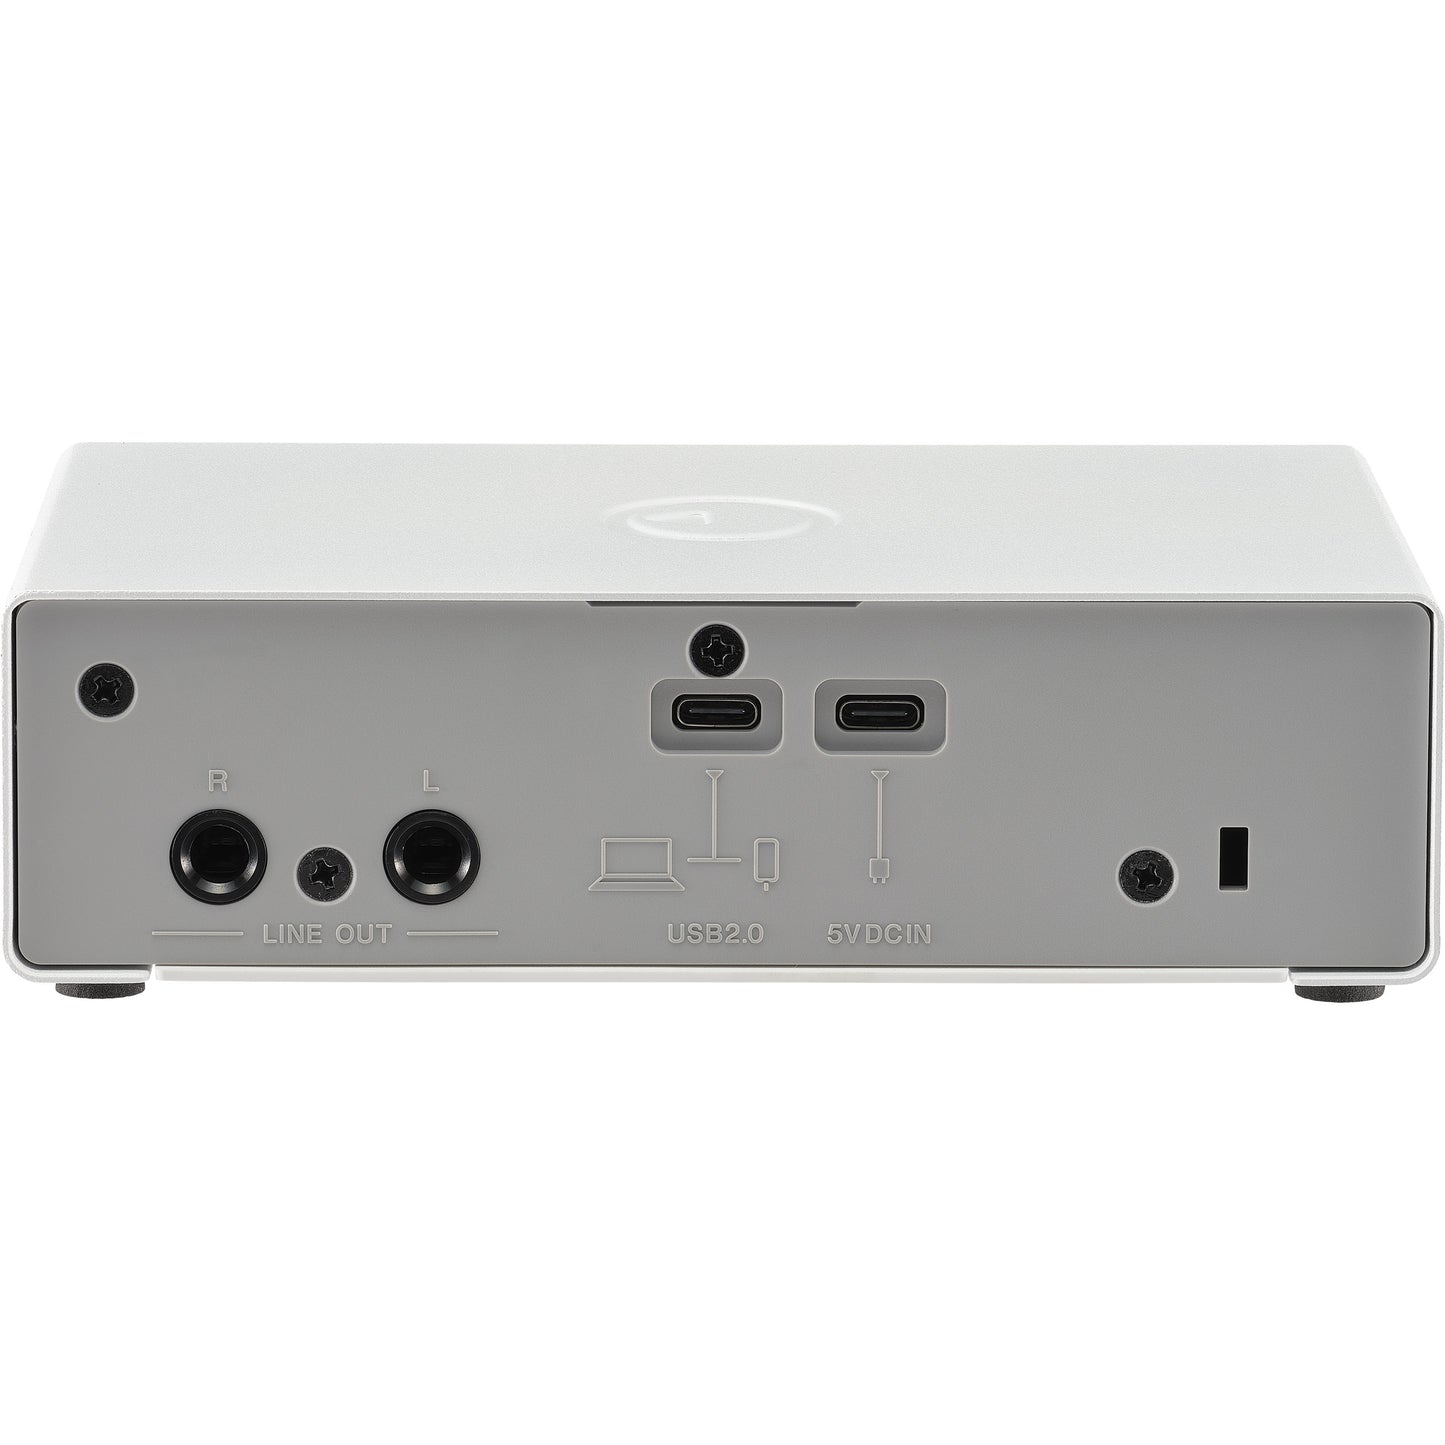 Steinberg IXO22 2 x 2 USB 2.0 Audio Interface with Two Mic Preamps - White